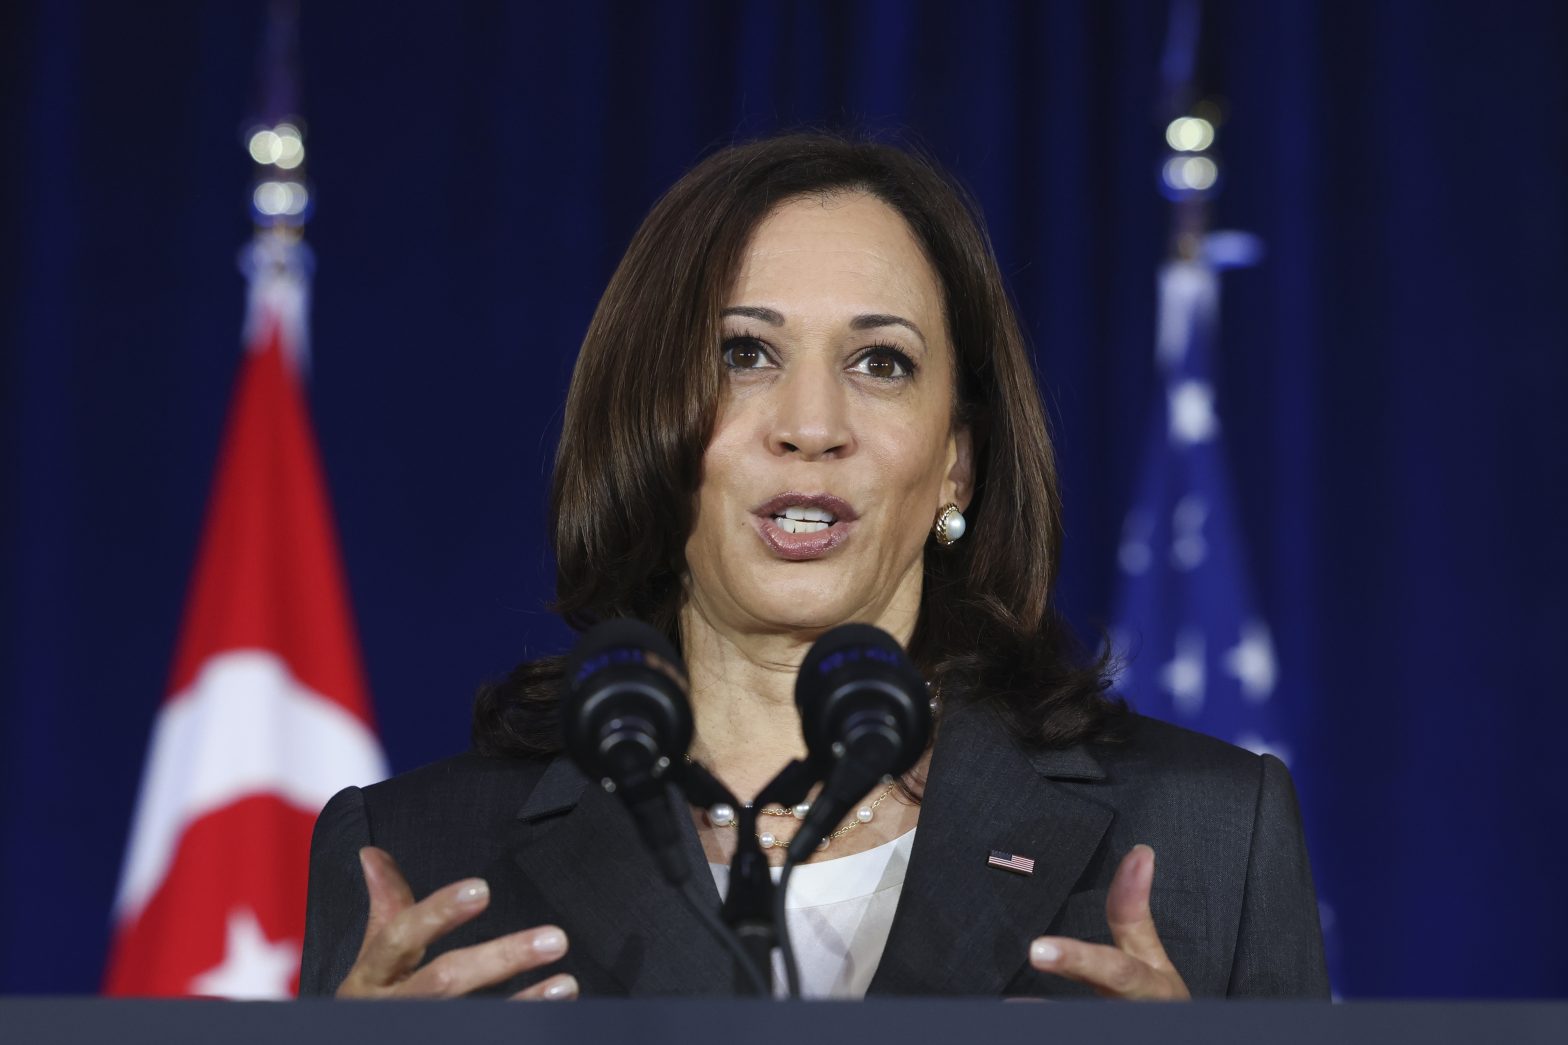 Harris Rebukes China in Speech on Indo-Pacific Vision